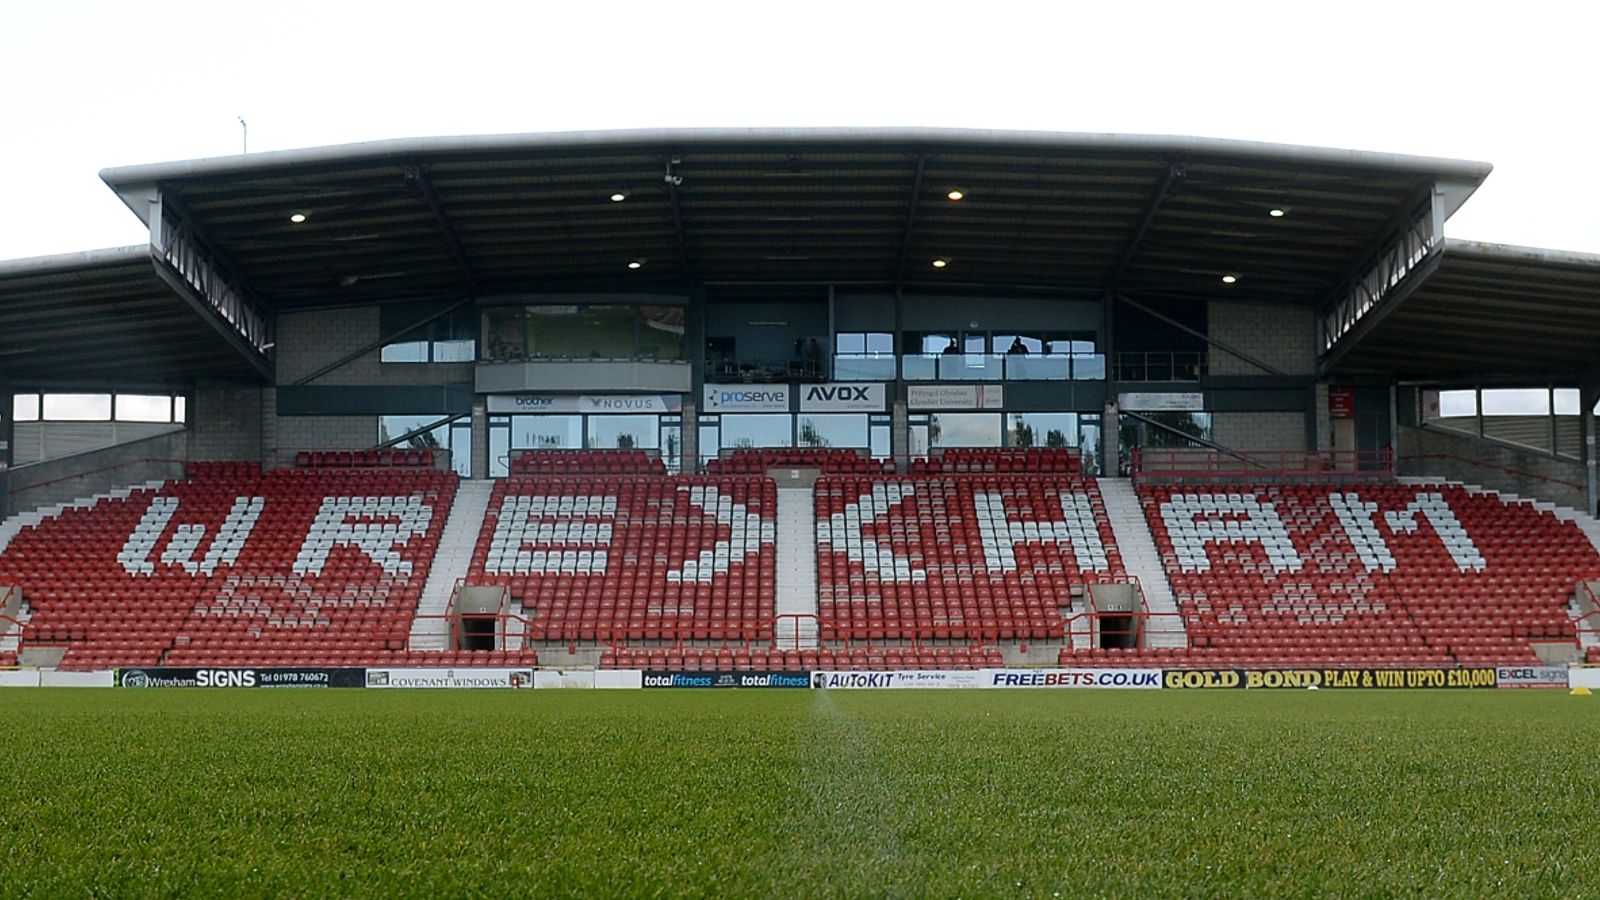 NEWS UPDATE: Wrexham has signed three new players thus far, with more to follow.